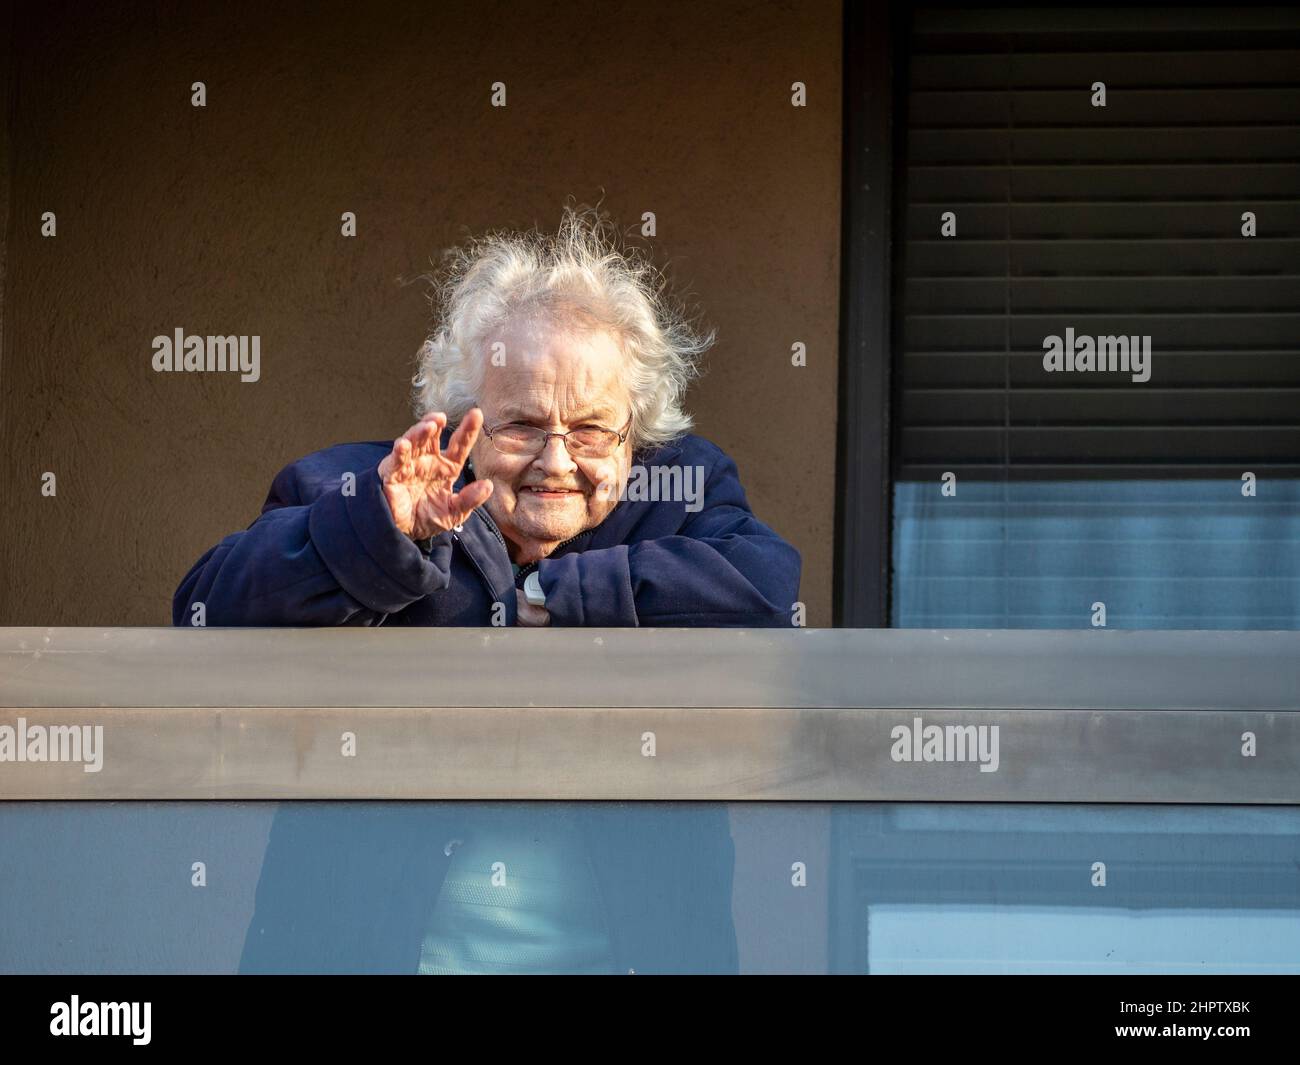 Wave visit to a Retirement home in Pandemic Lockdown: A senior woman waves from her balcony in an Ottawa retirement home during the 2020-2021 global COVID-19 pandemic. Stock Photo